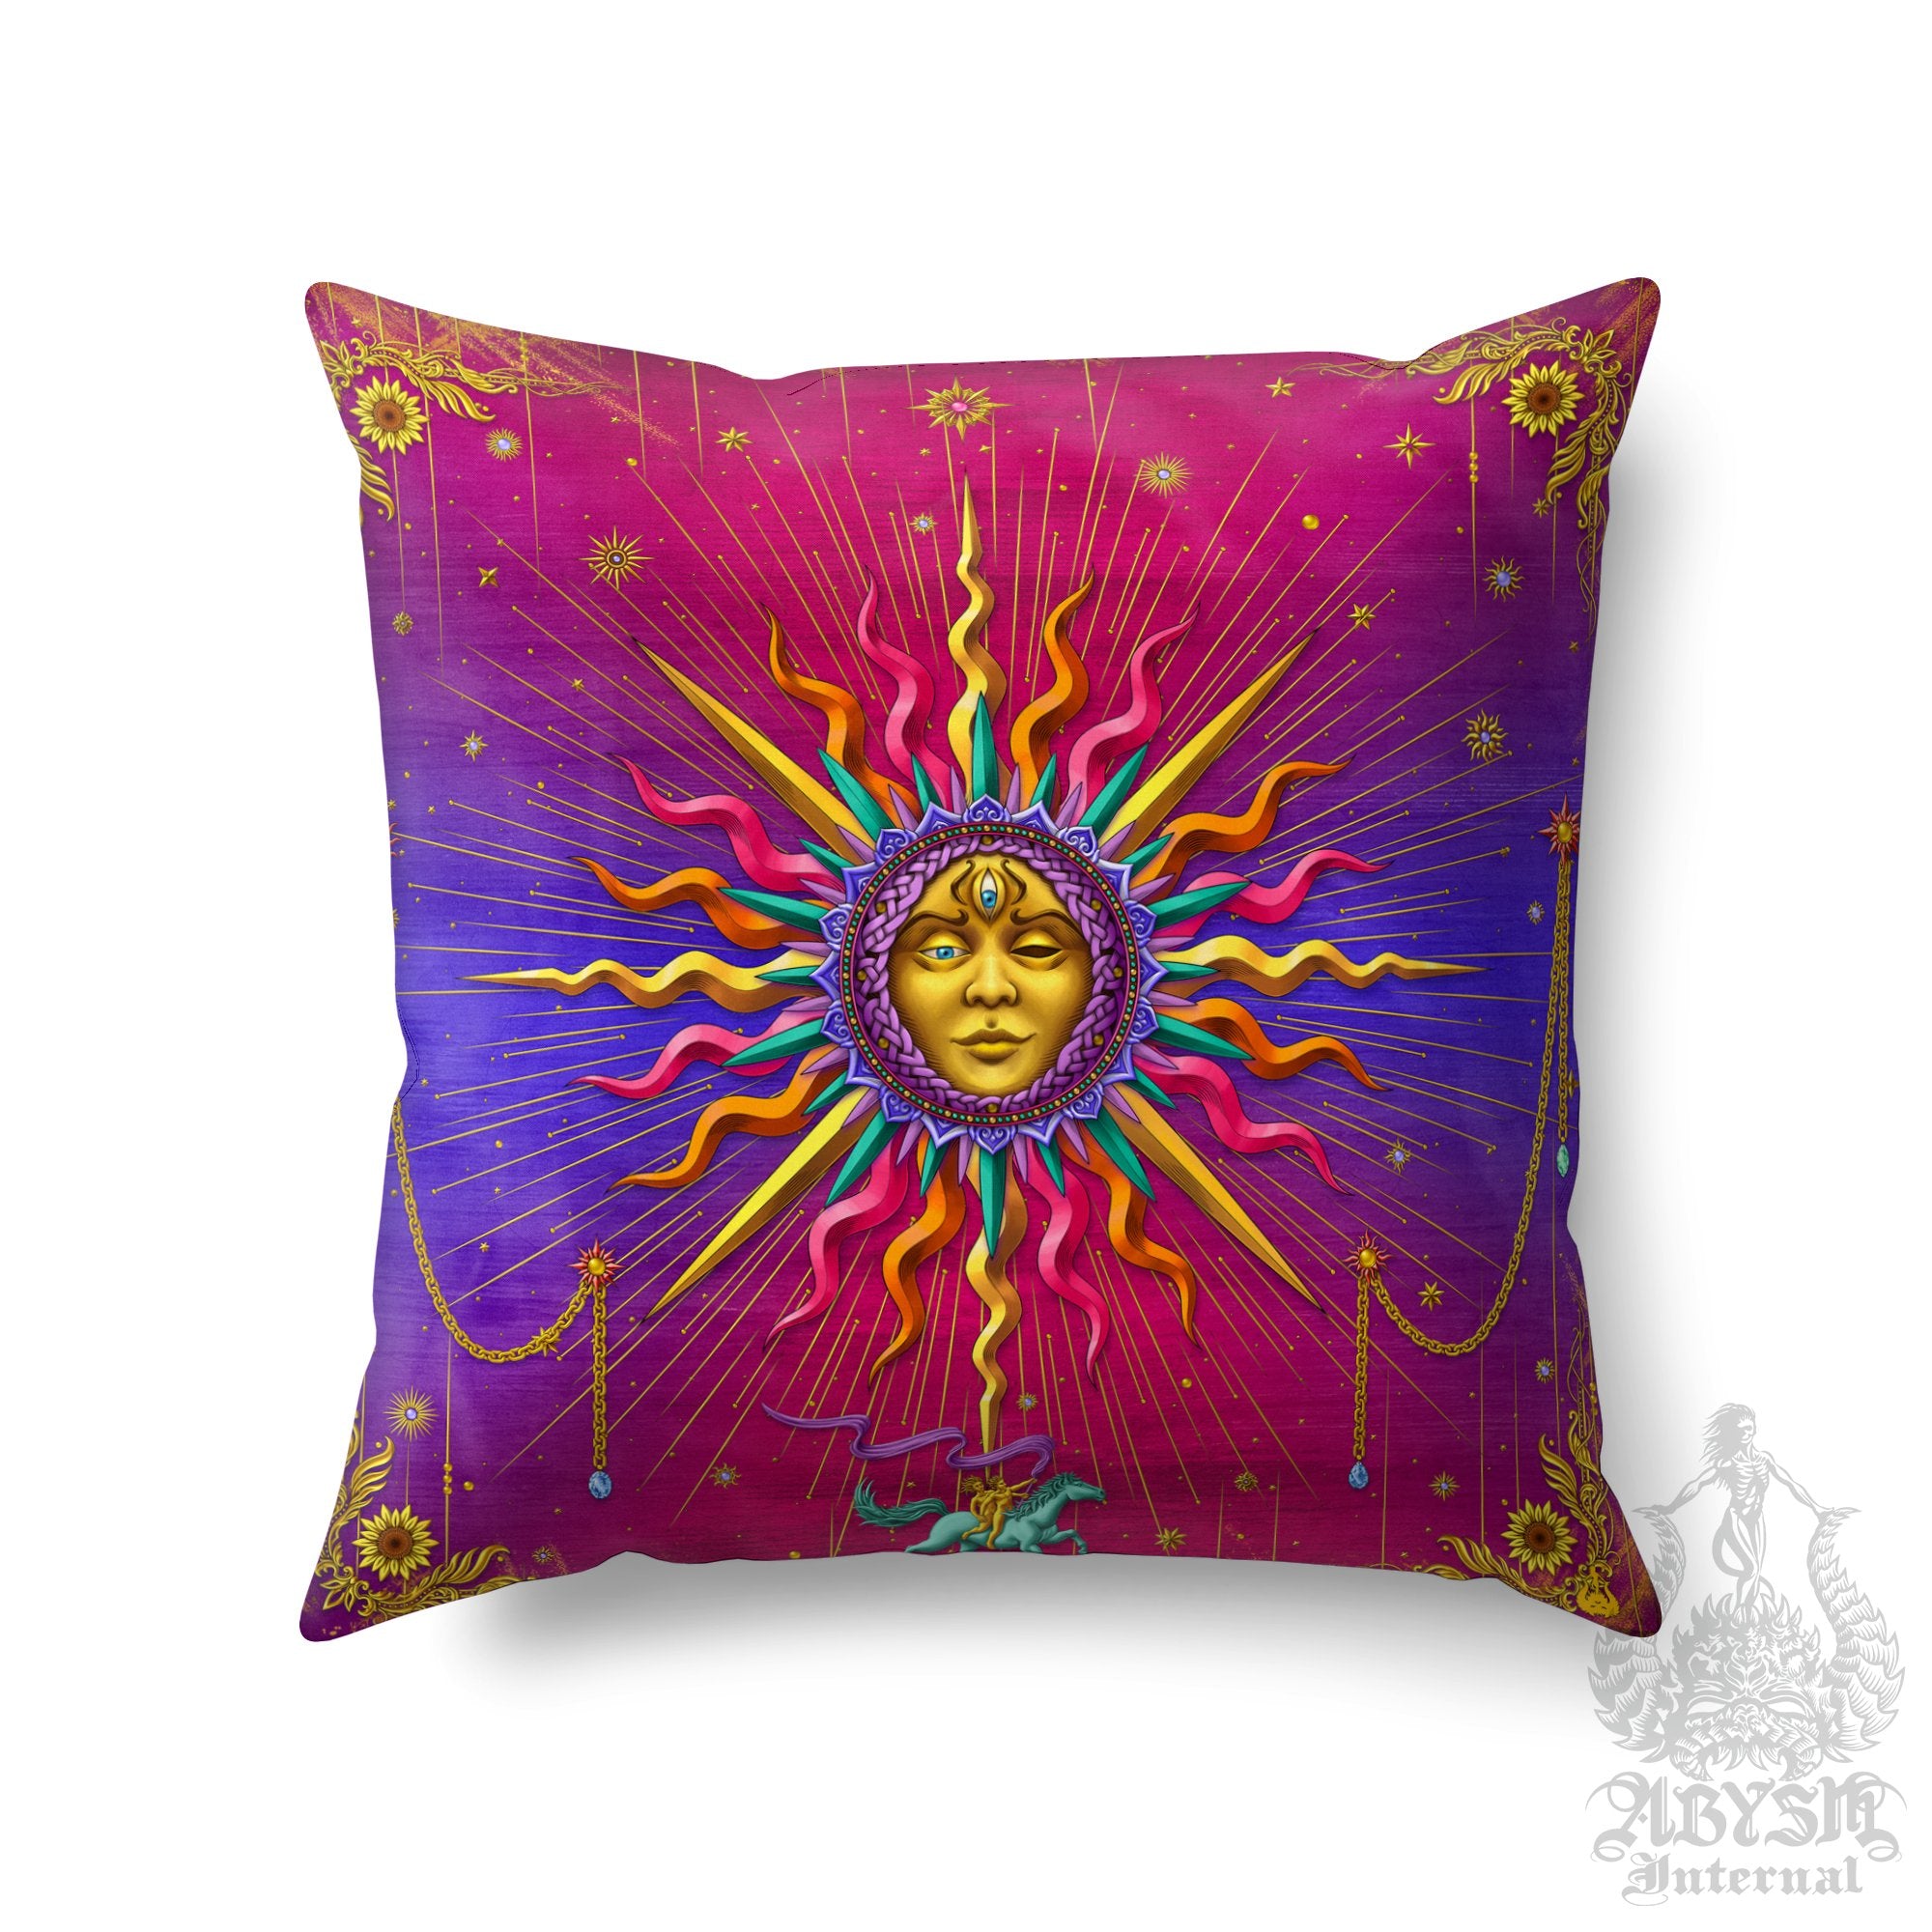 Sun Throw Pillow, Indie Decorative Accent Pillow, Square Cushion Cover, Arcana Tarot Art, Boho Home, Magic & Fortune Room Decor - Psy - Abysm Internal